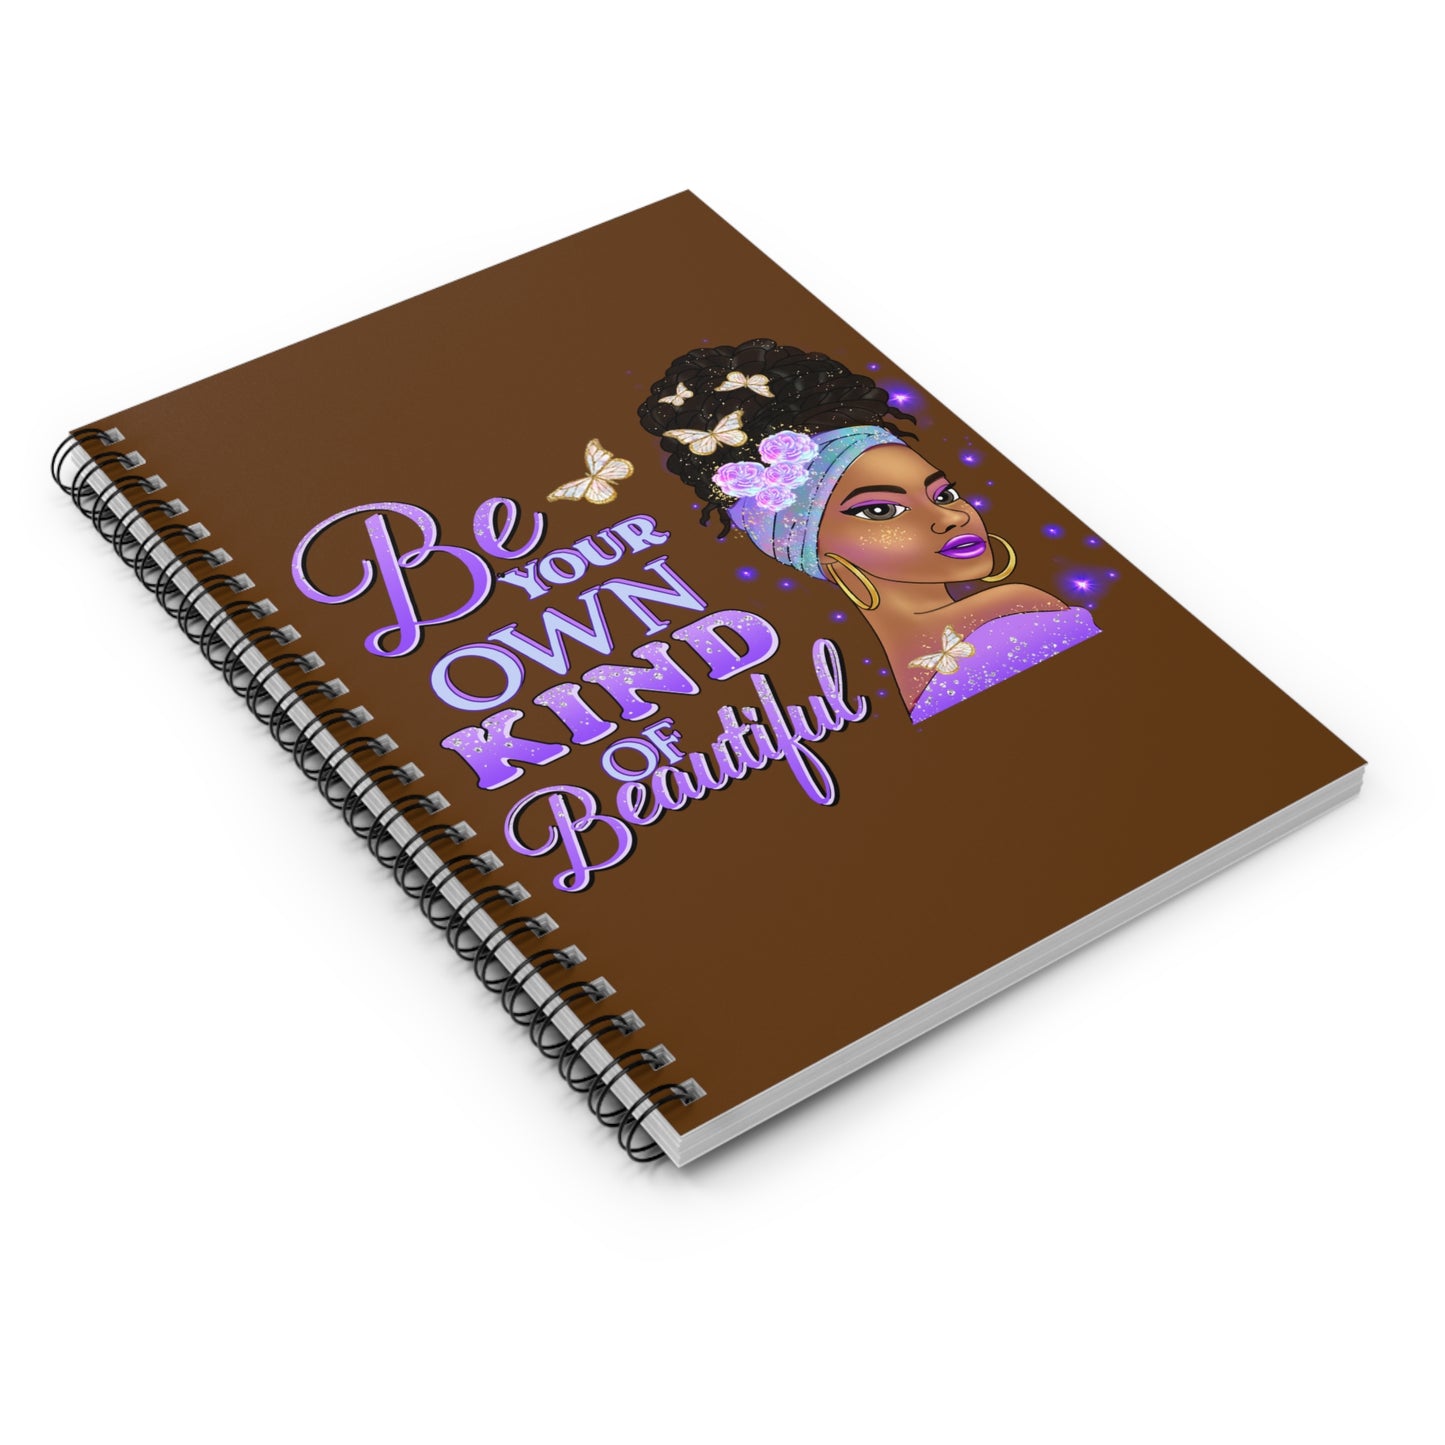 Own Kind of Beautiful: Spiral Notebook - Log Books - Journals - Diaries - and More Custom Printed by TheGlassyLass